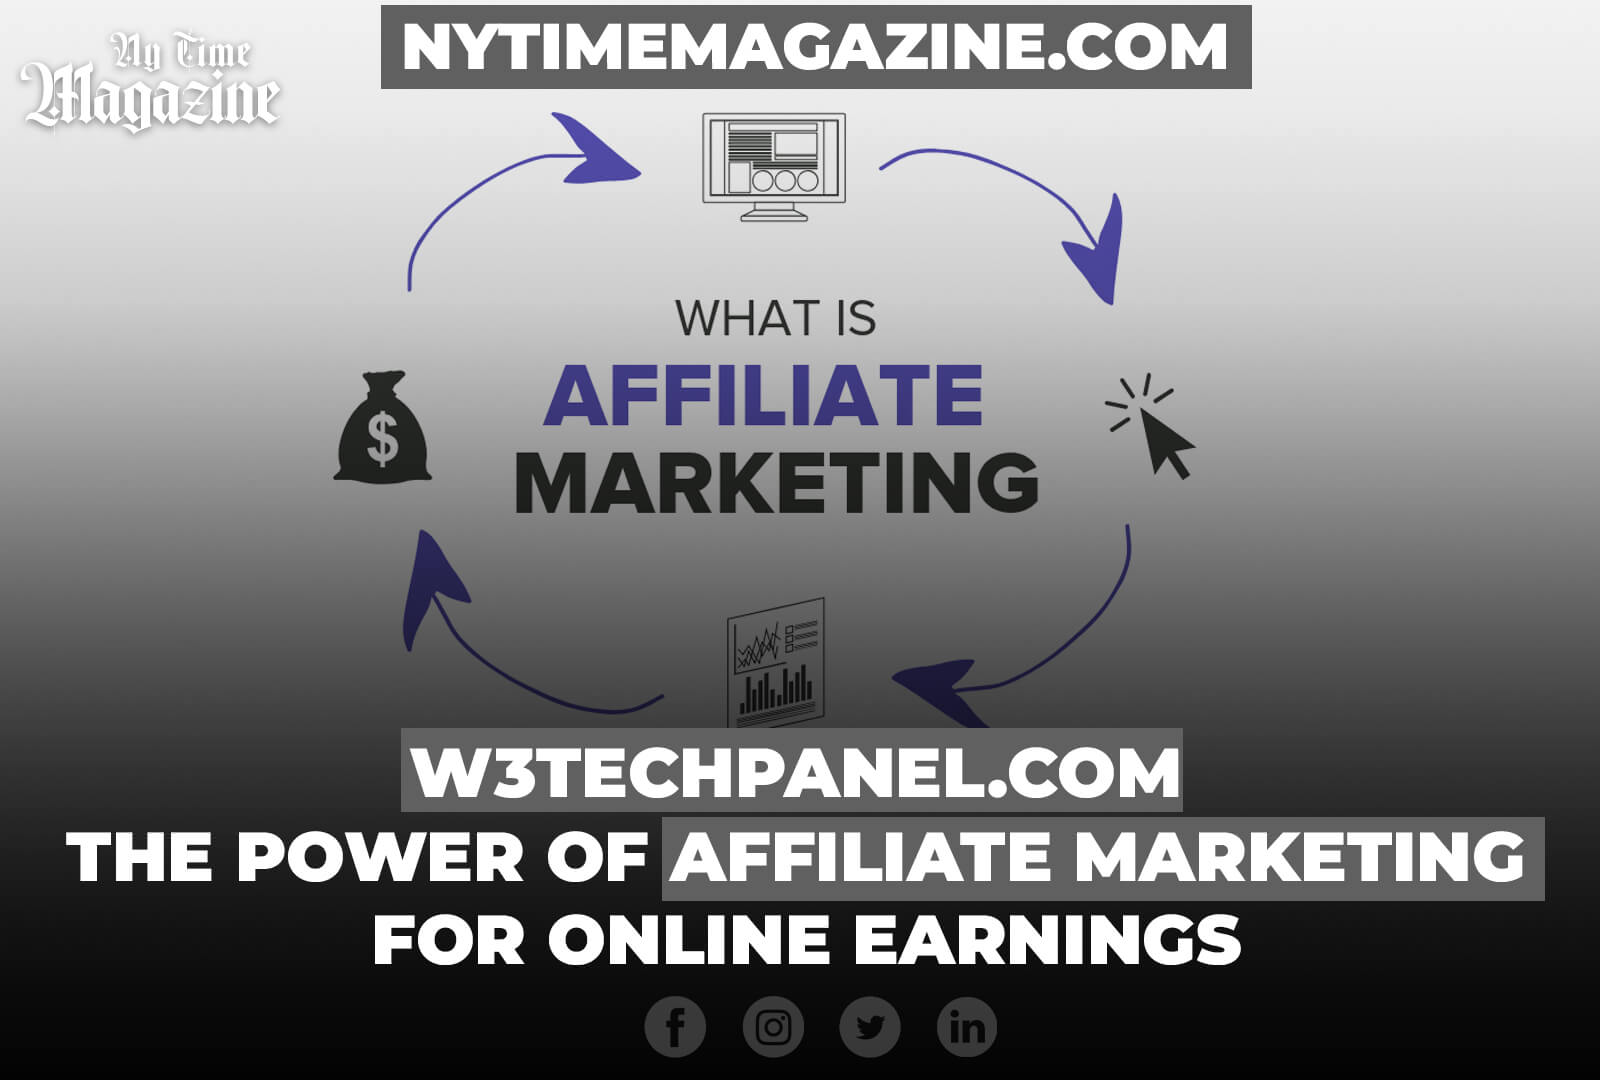 W3TECHPANEL.COM: THE POWER OF AFFILIATE MARKETING FOR ONLINE EARNINGS